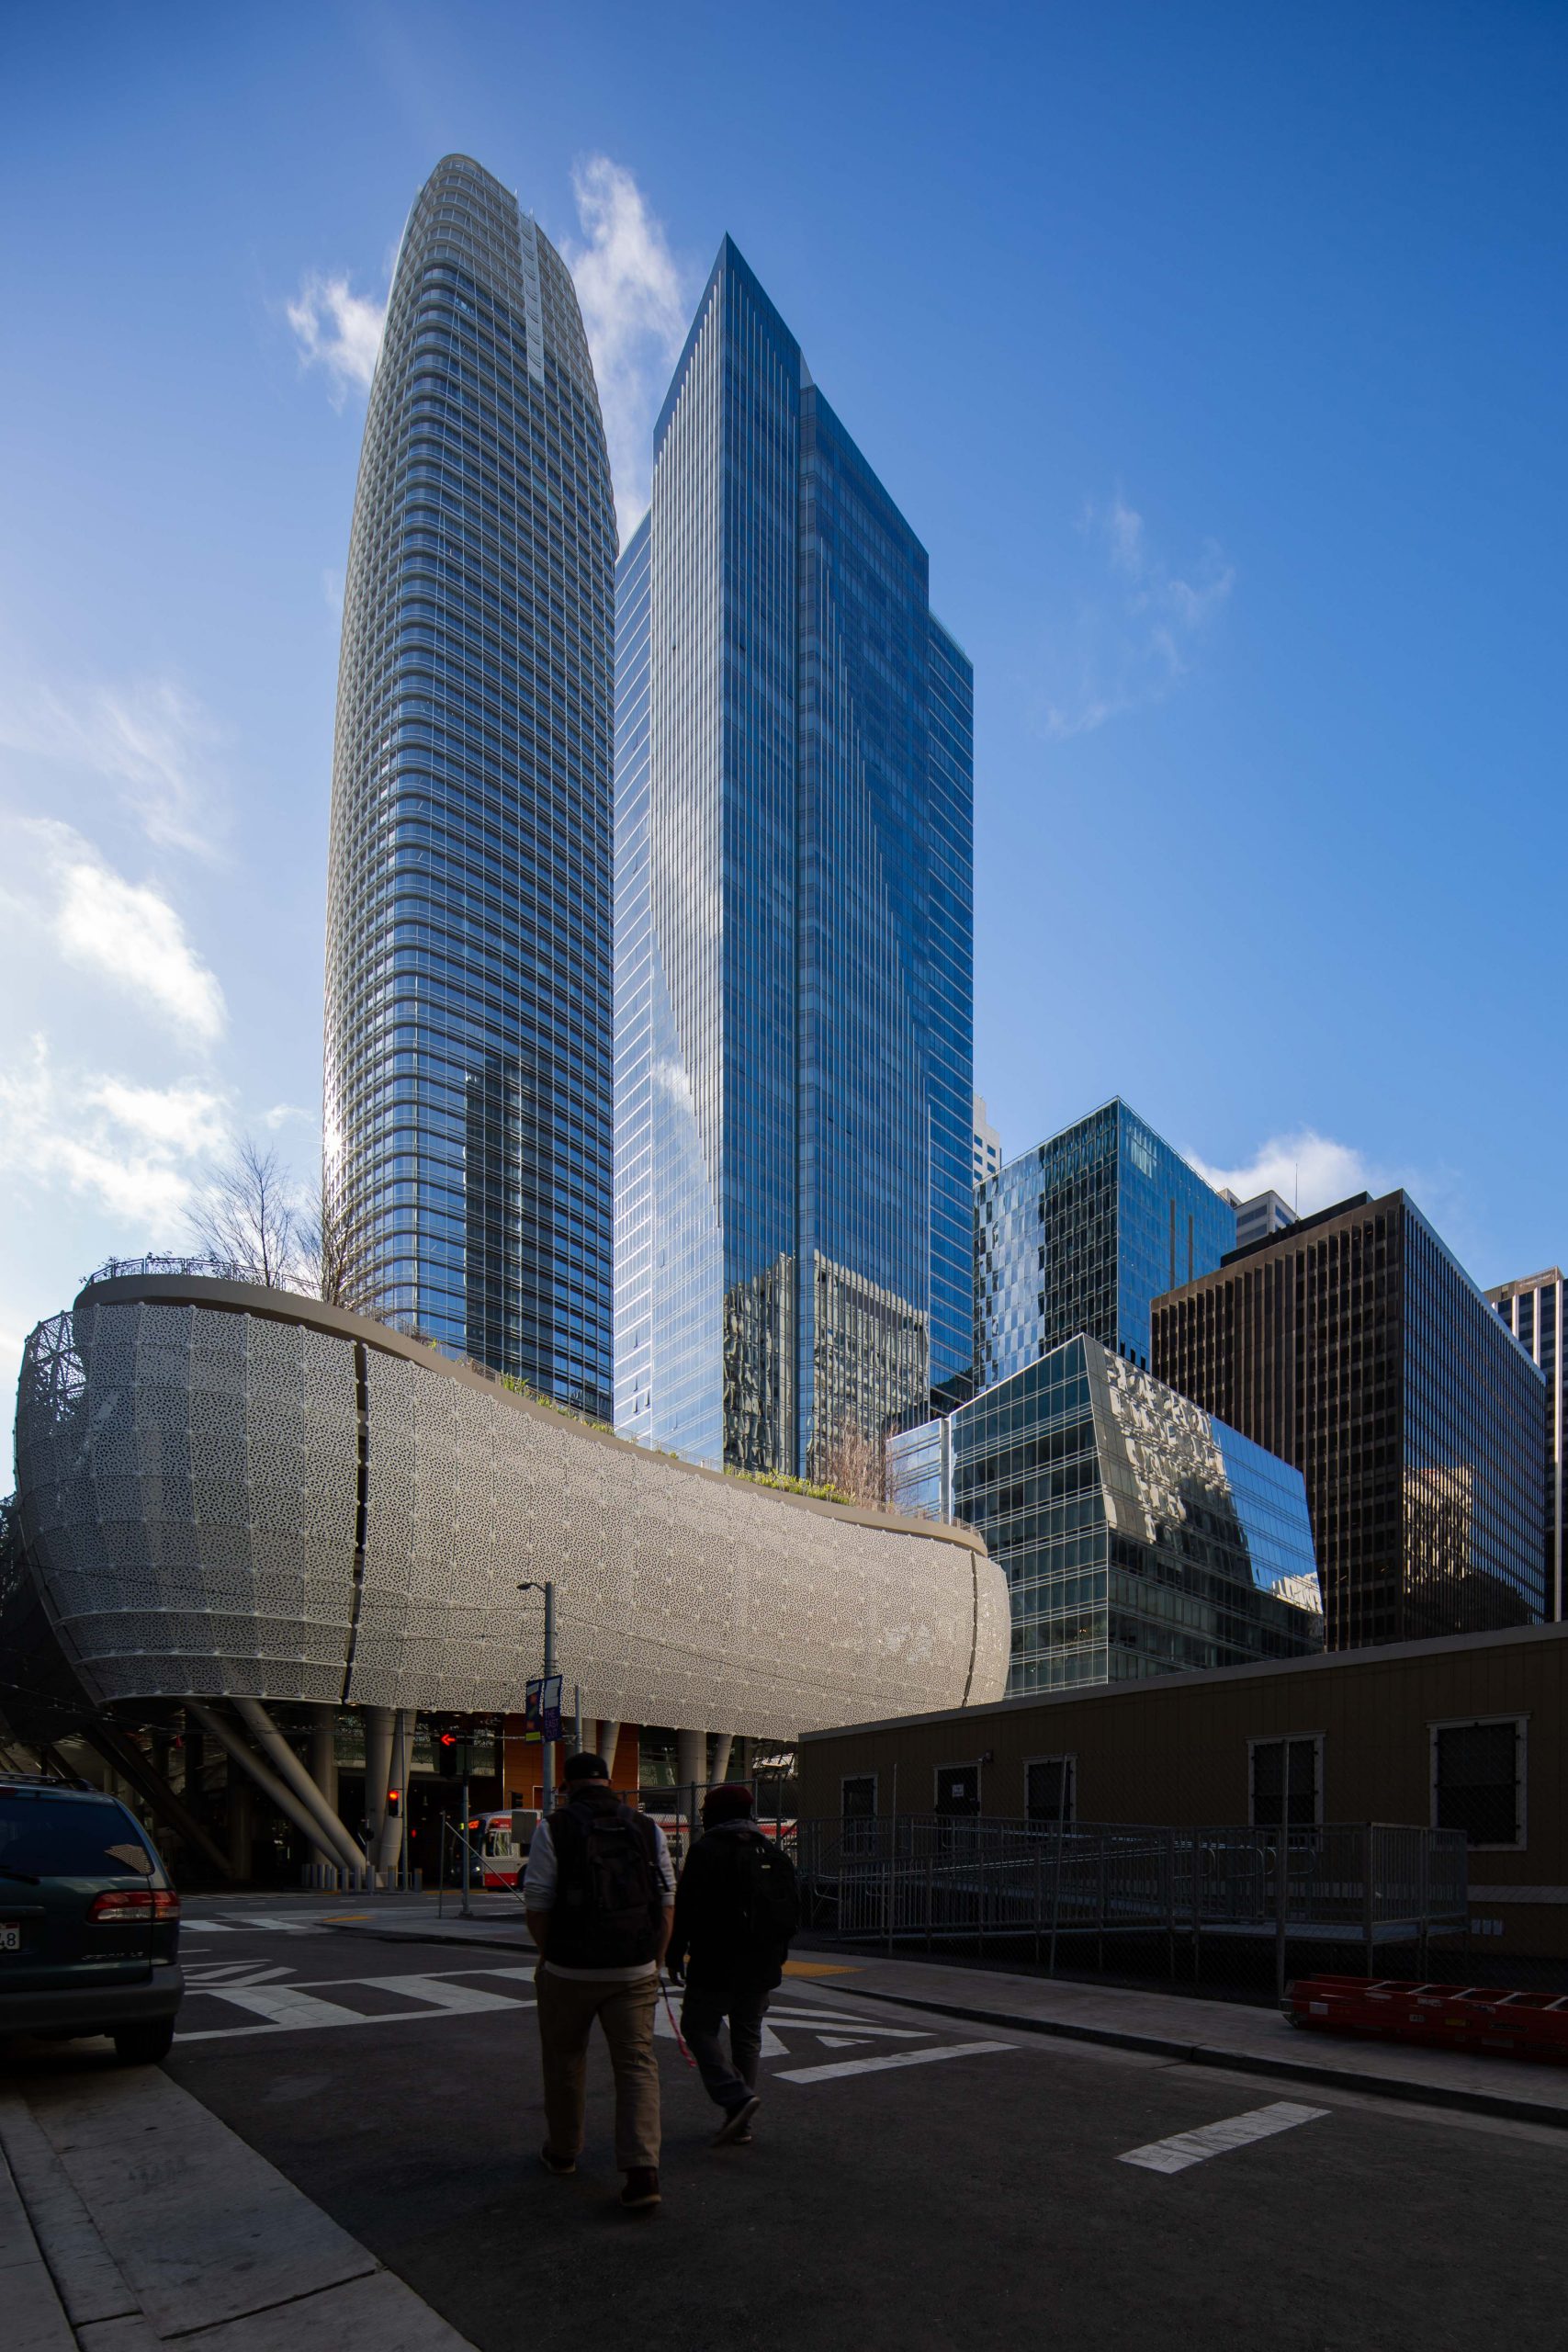 Millennium Tower seen from across Beale Street, image by Andrew Campbell Nelson